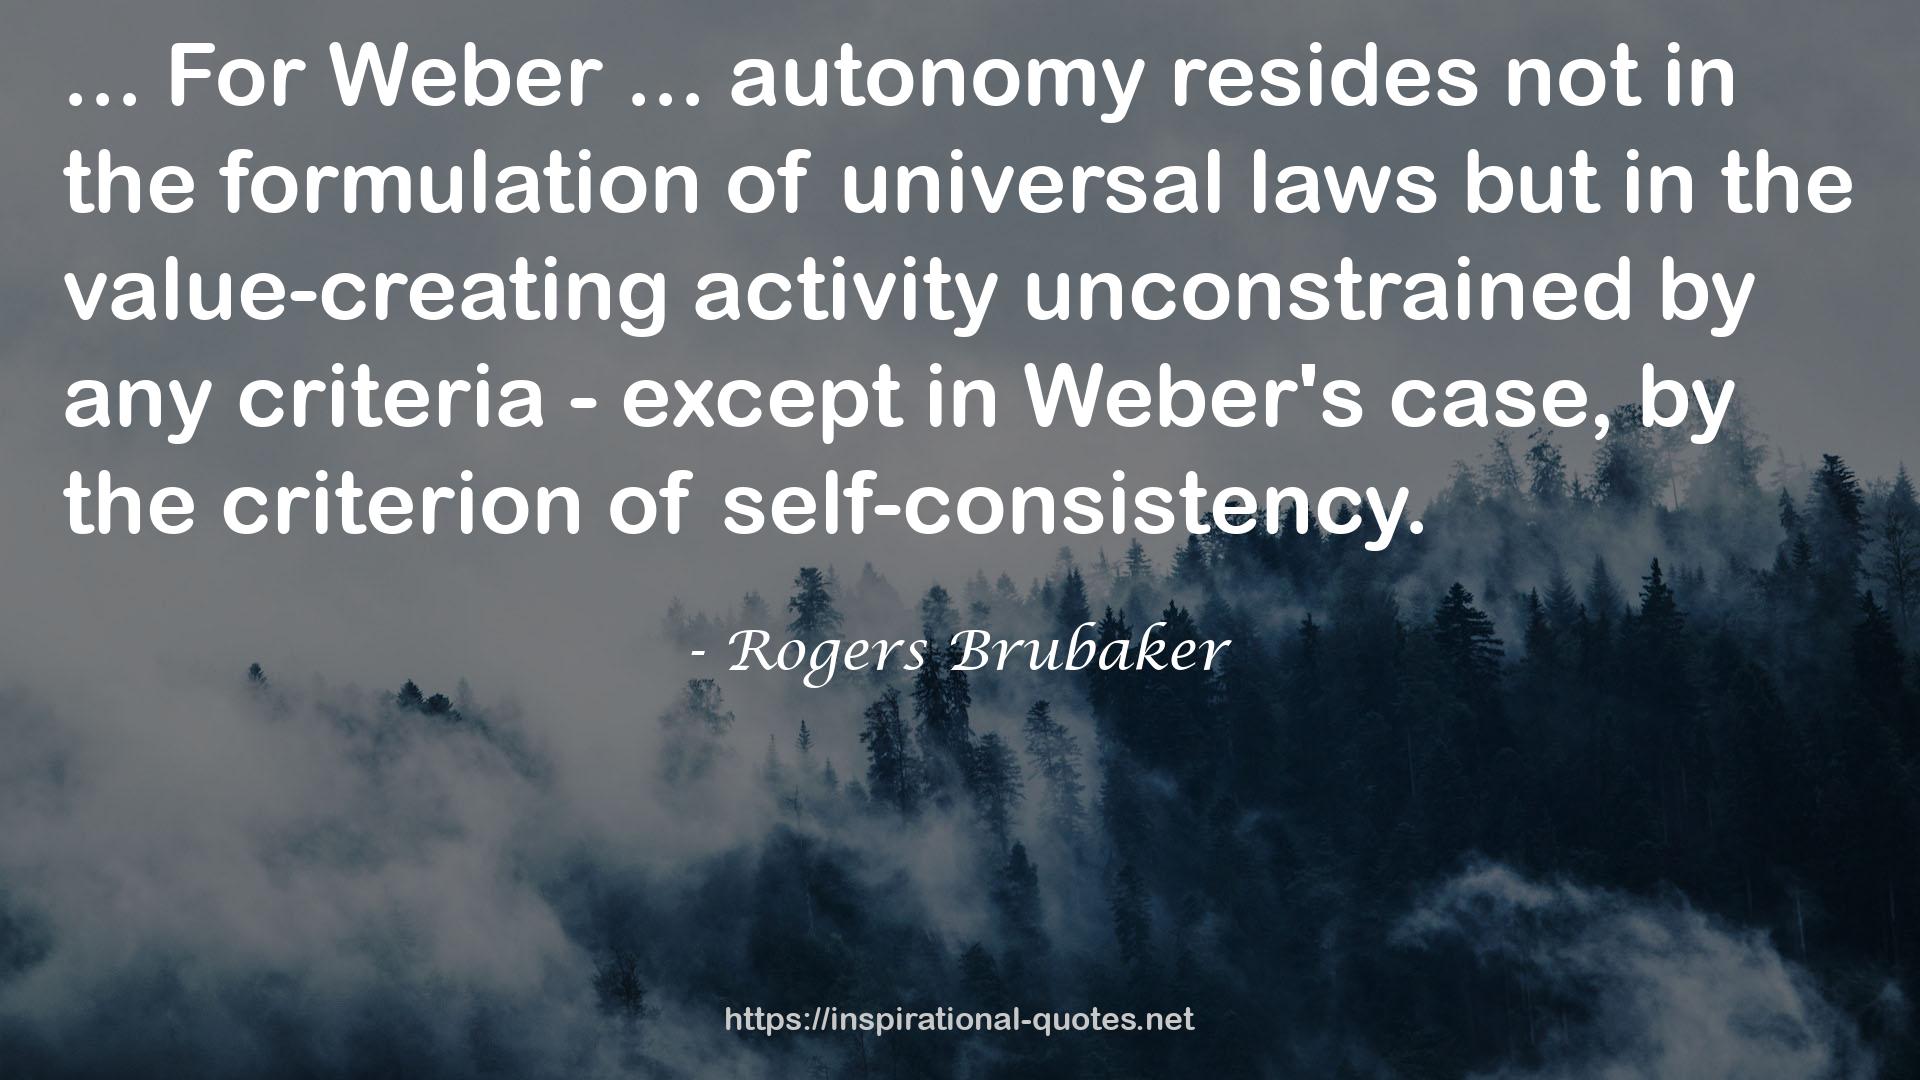 Rogers Brubaker QUOTES